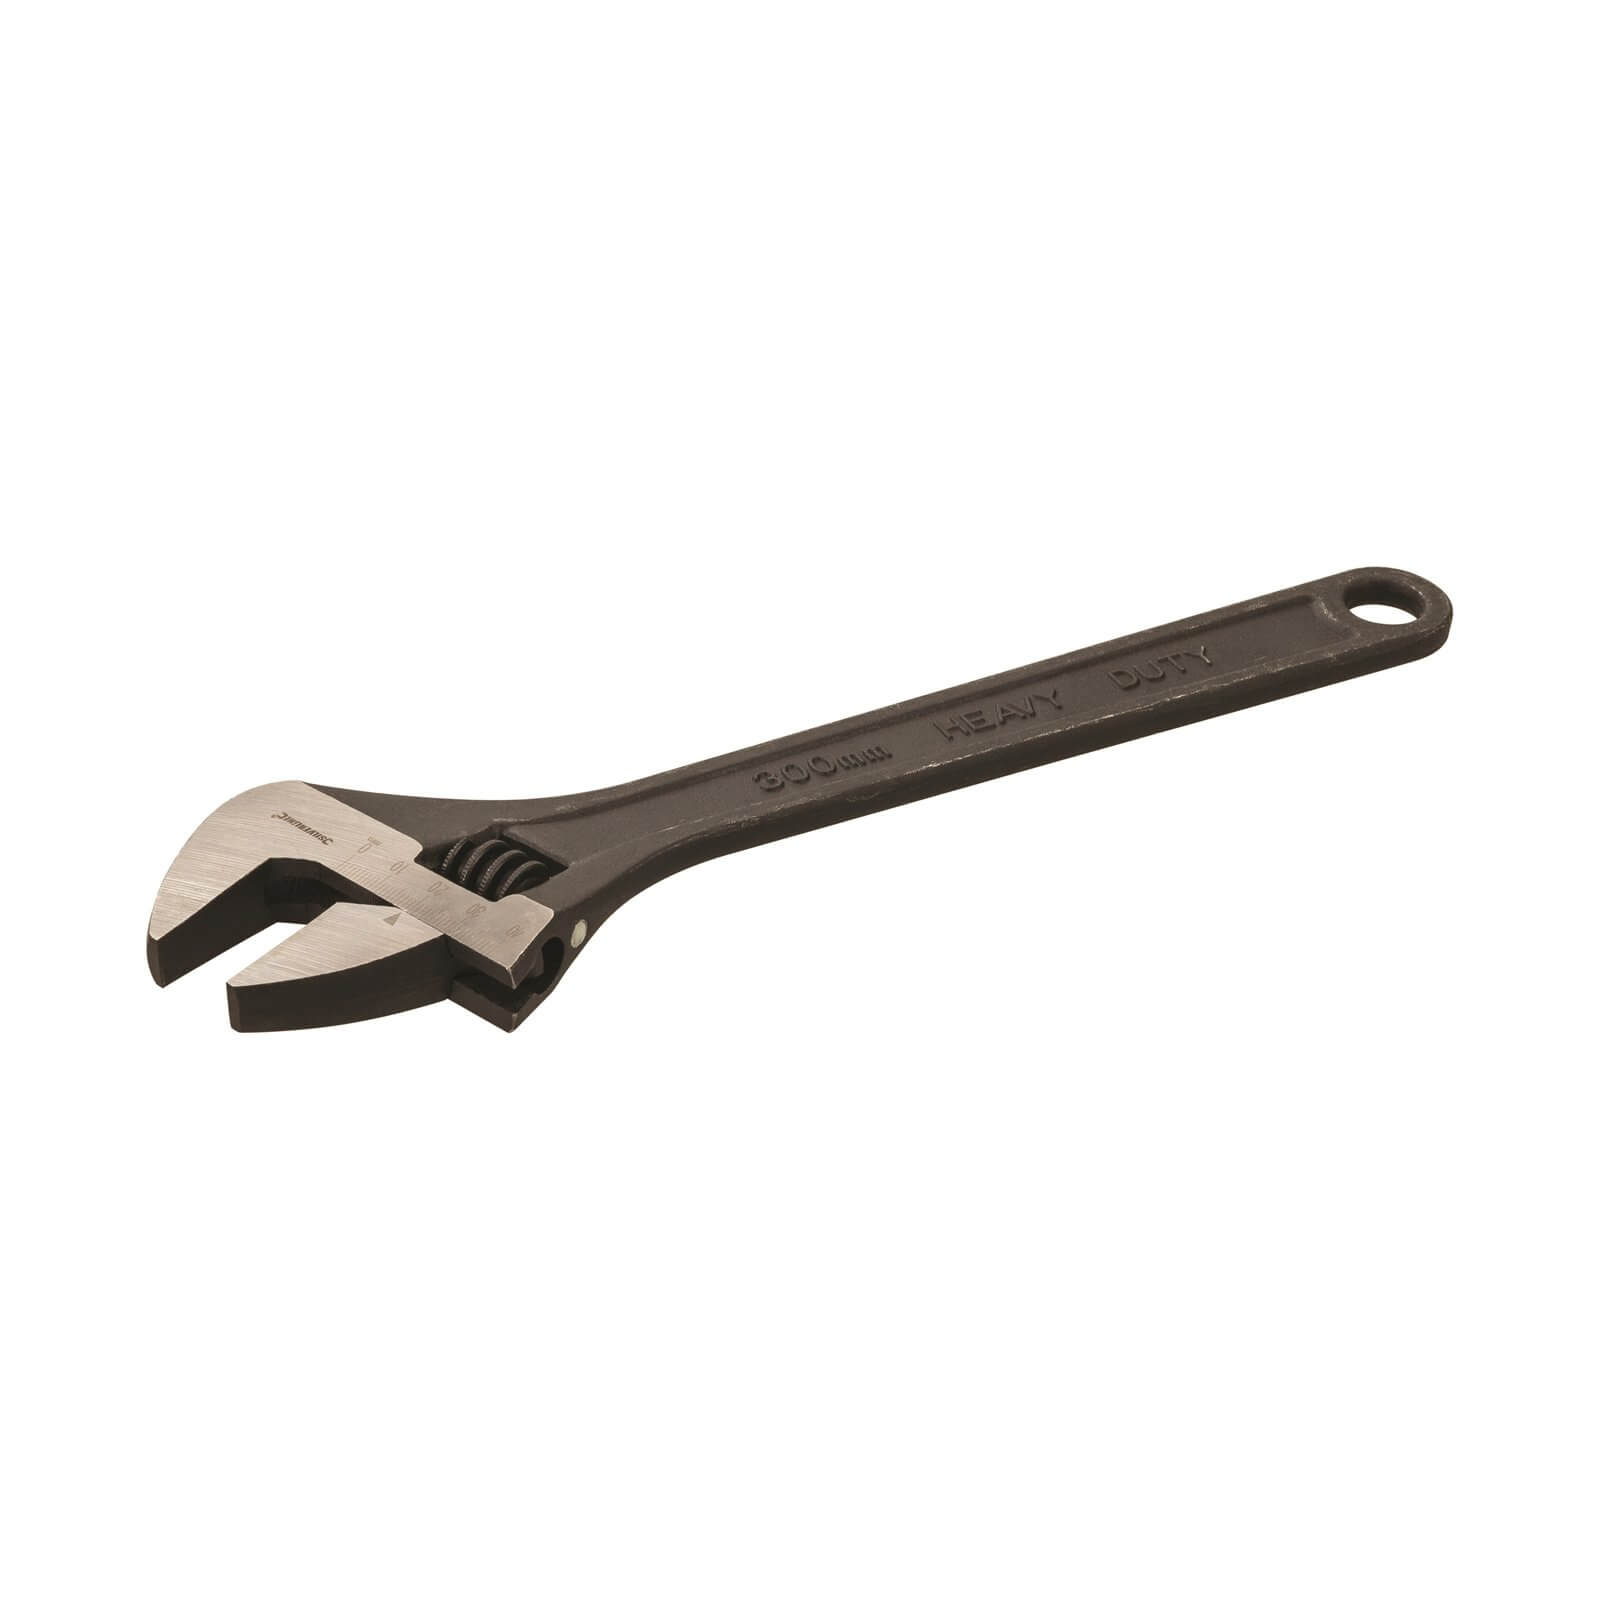 Silverline Expert Adjustable Wrench 250mm Jaw 27mm